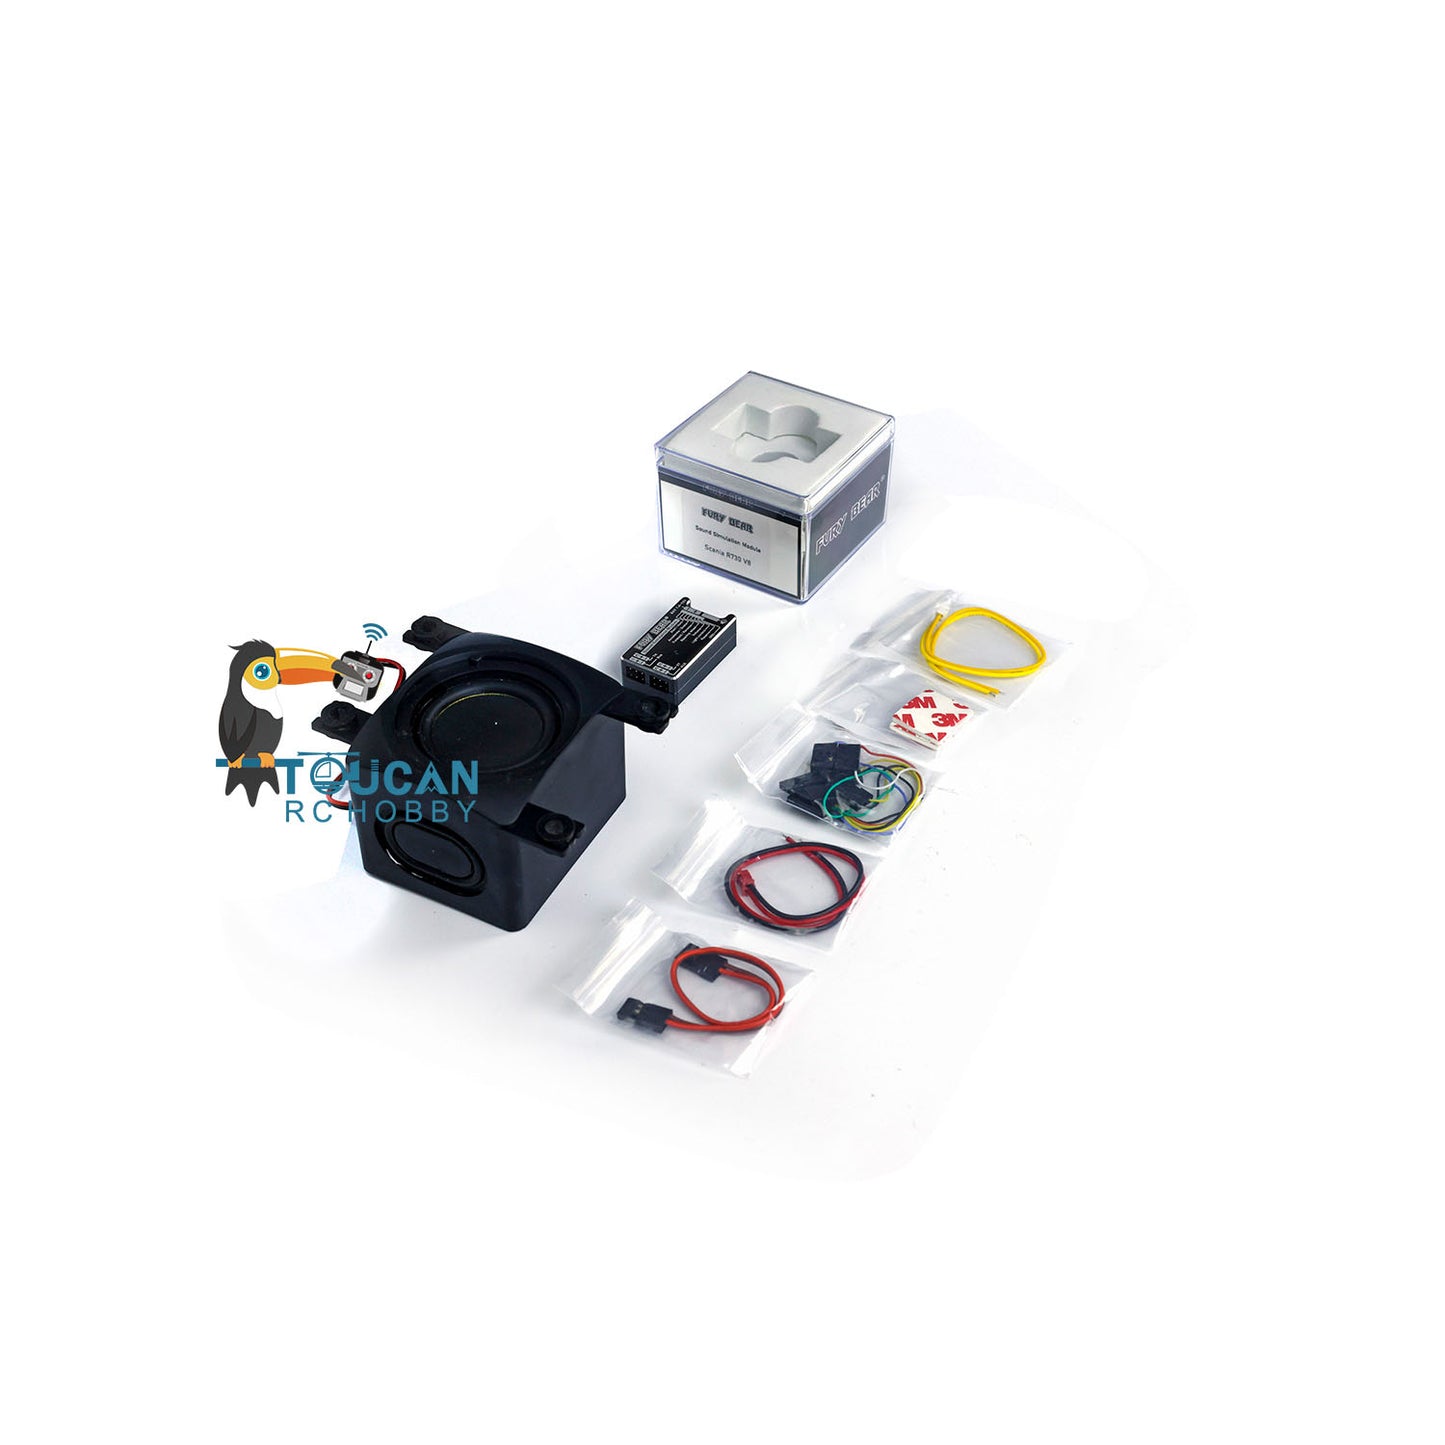 Sound System Spare Part DIY for 1/14 LESU Radio Control Tractor Truck R730 EURO6 FH750 Hobby Model 43x24x13.5mm